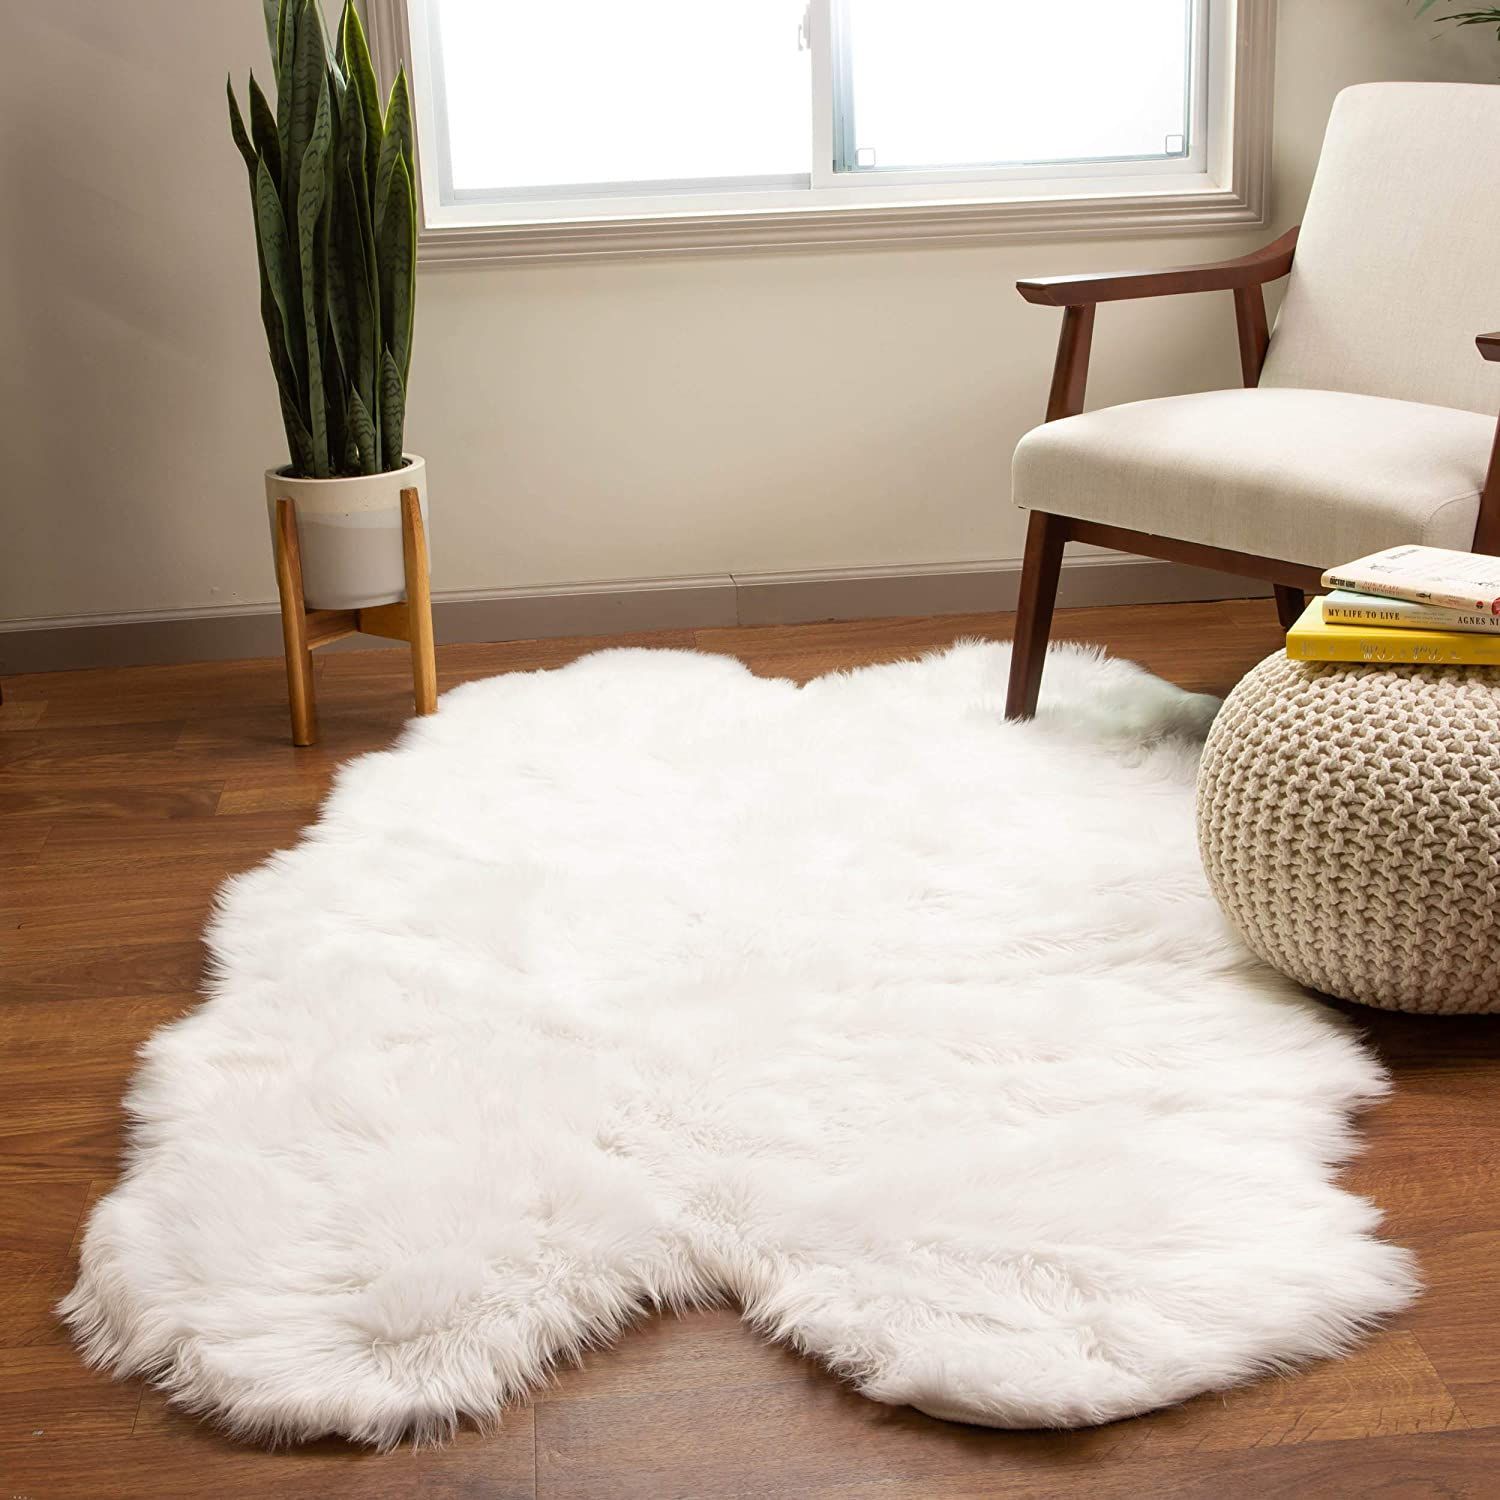 Soft Area Rugs To Make Your Home Cozy, Really Cool Rugs